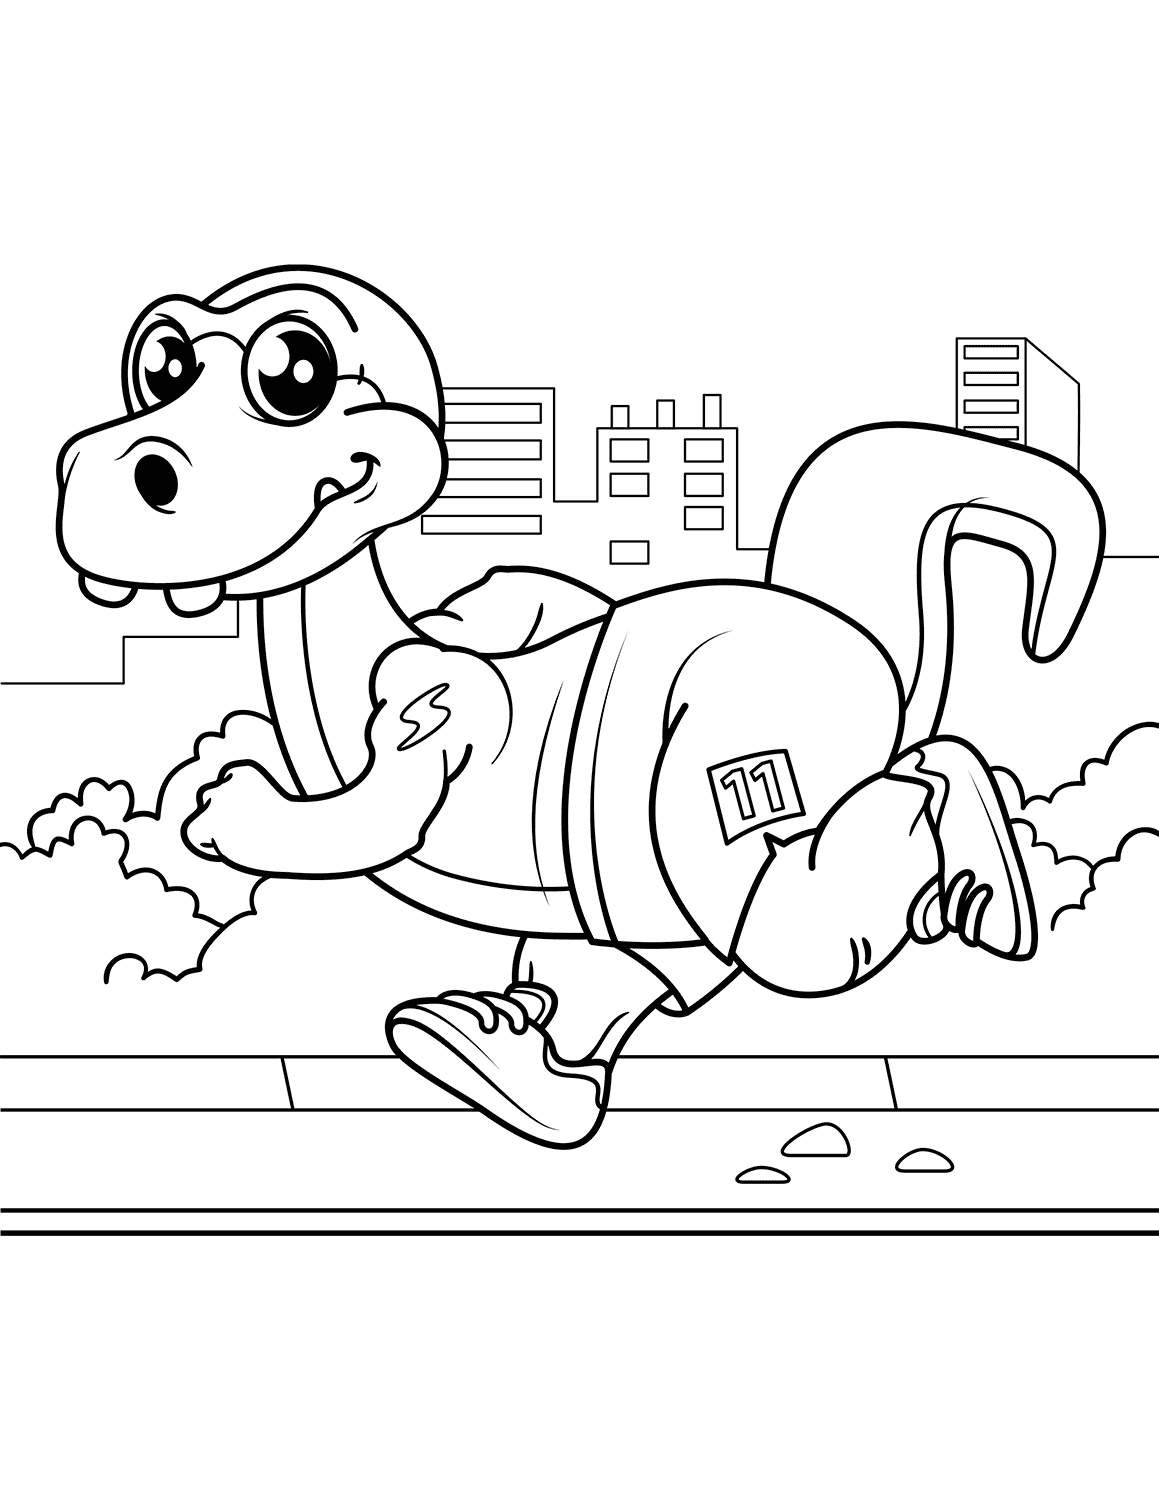 Cute Dinosaur Runner Coloring Pages